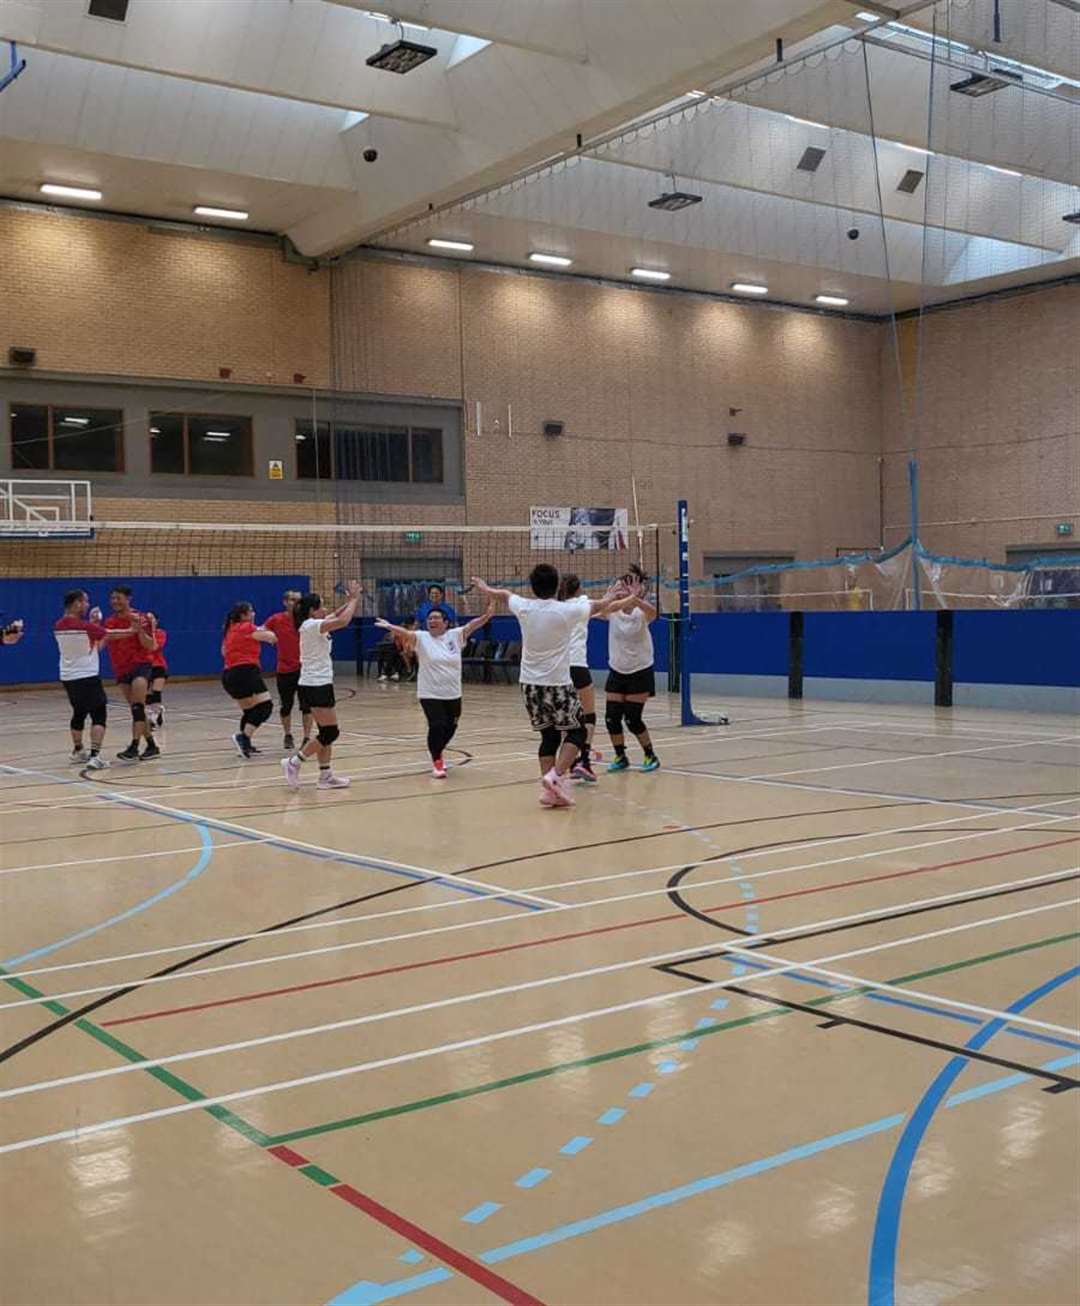 The first invitational Filipino Volleyball Game saw King's Lynn Defenders take on Norwich All-Stars Team at the Alive Lynnsports Centre.